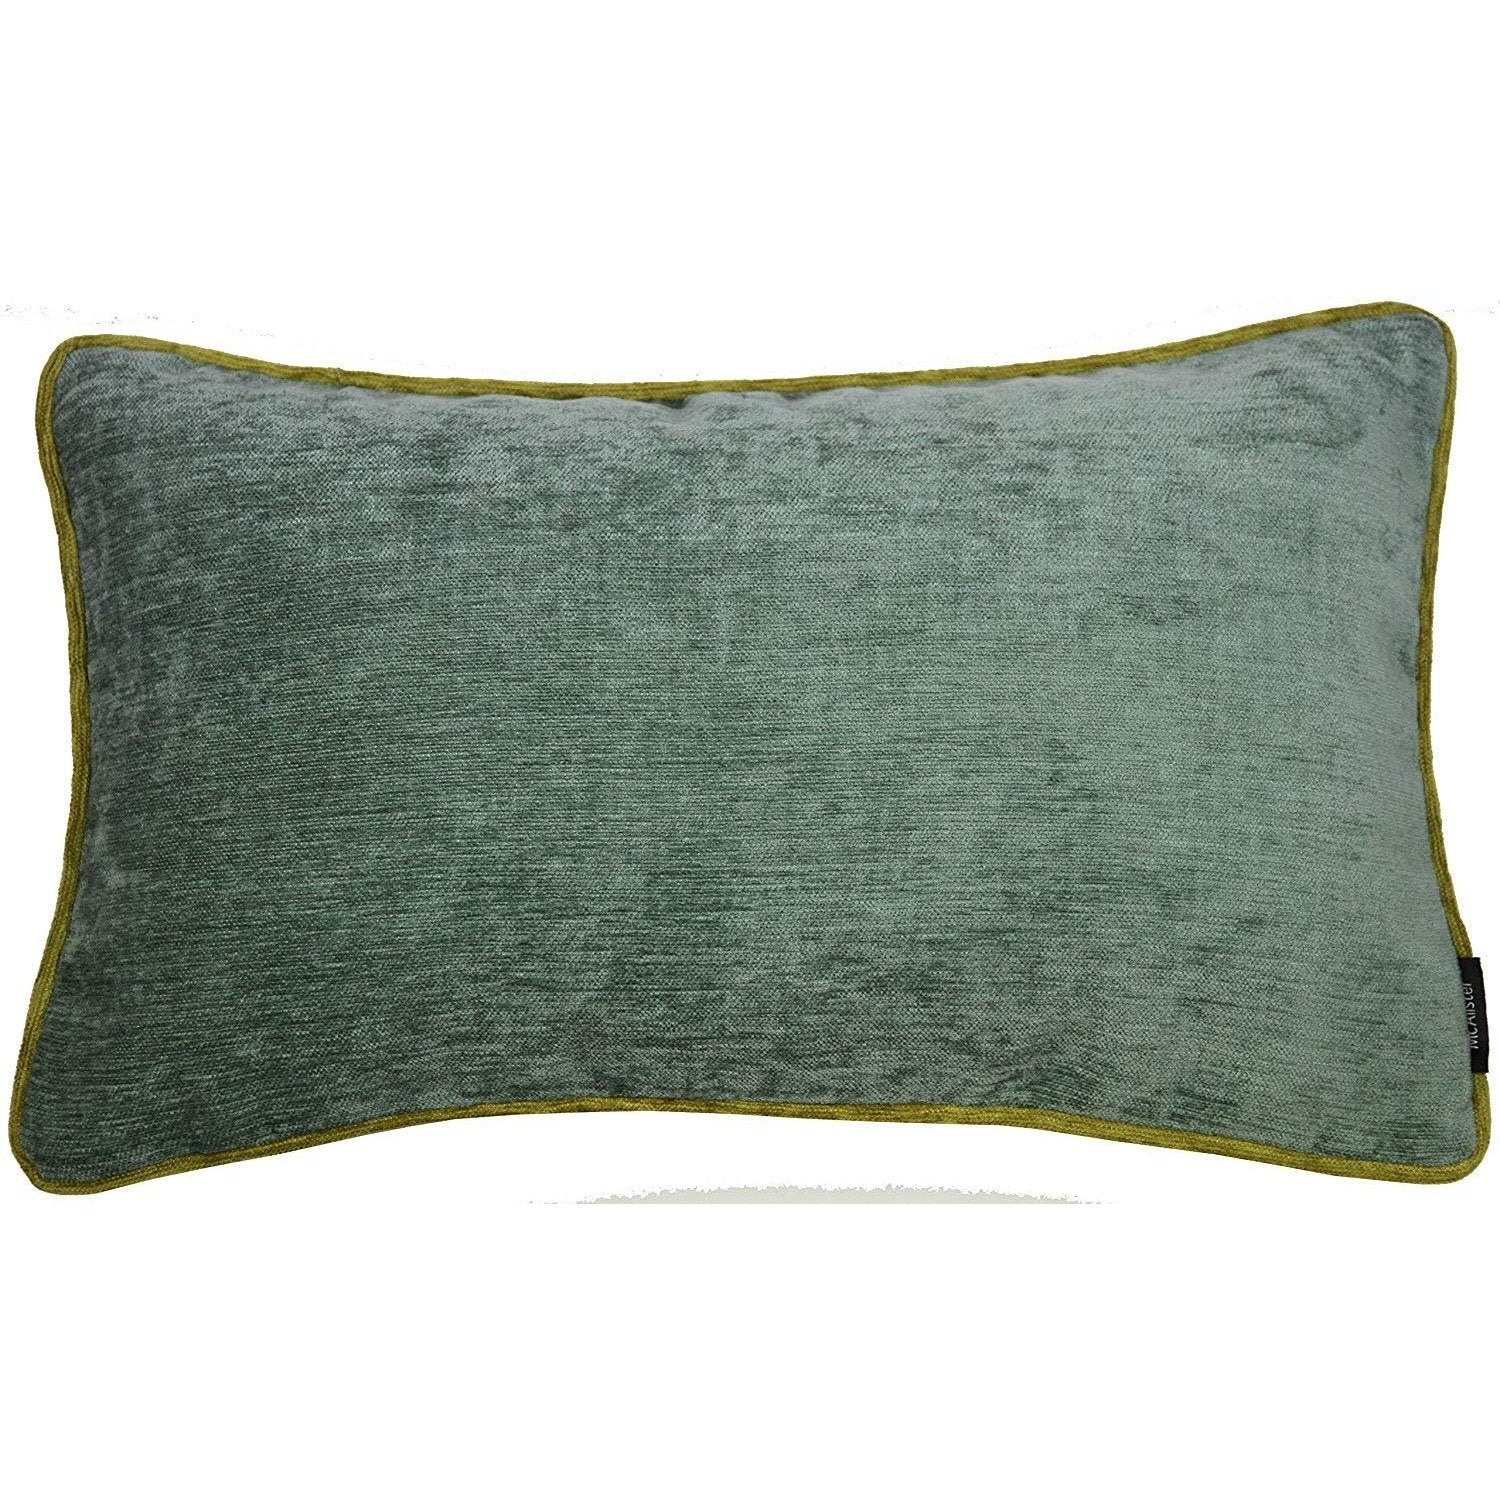 McAlister Textiles Alston Chenille Duck Egg Blue + Green Cushion Cushions and Covers Cover Only 50cm x 30cm 